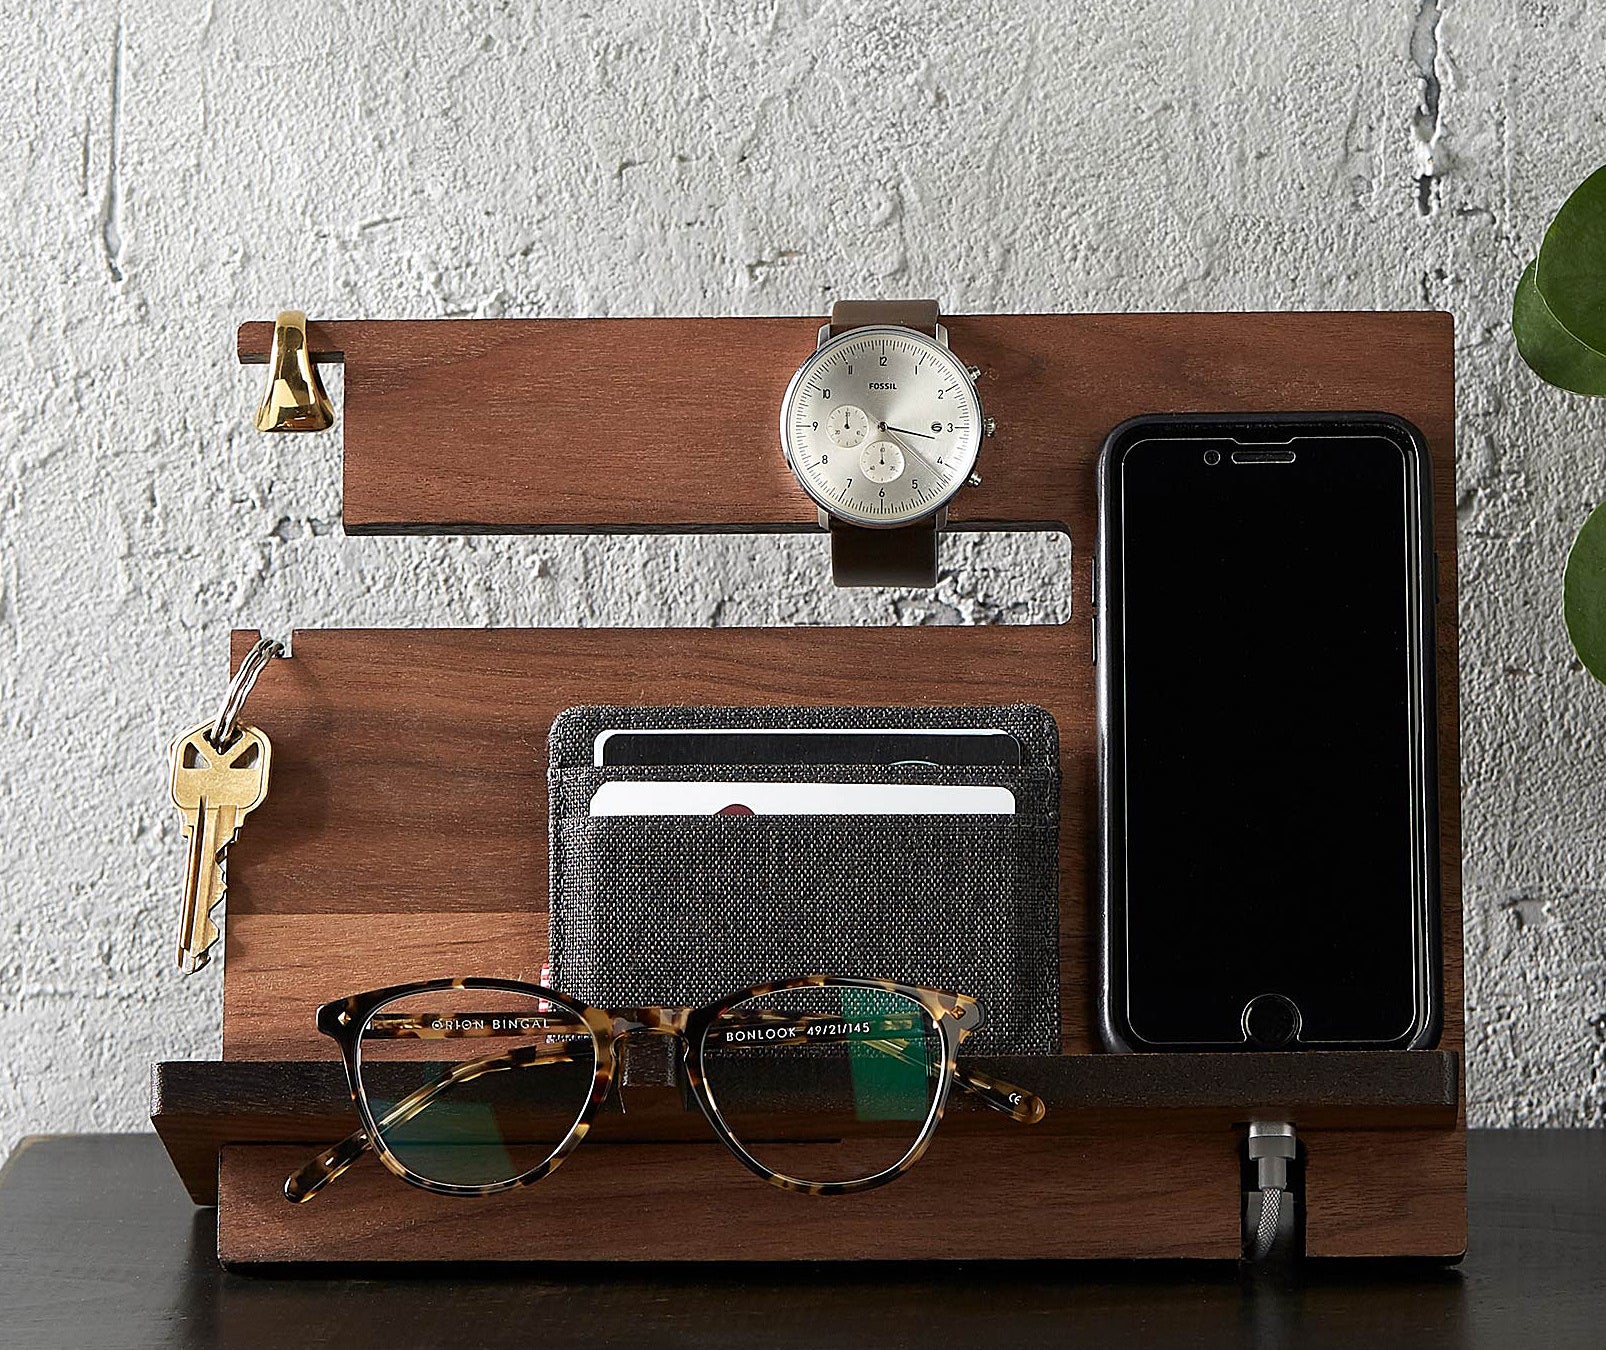 Small items like sunglasses, a phone, keys, and a wallet on a wooden tray